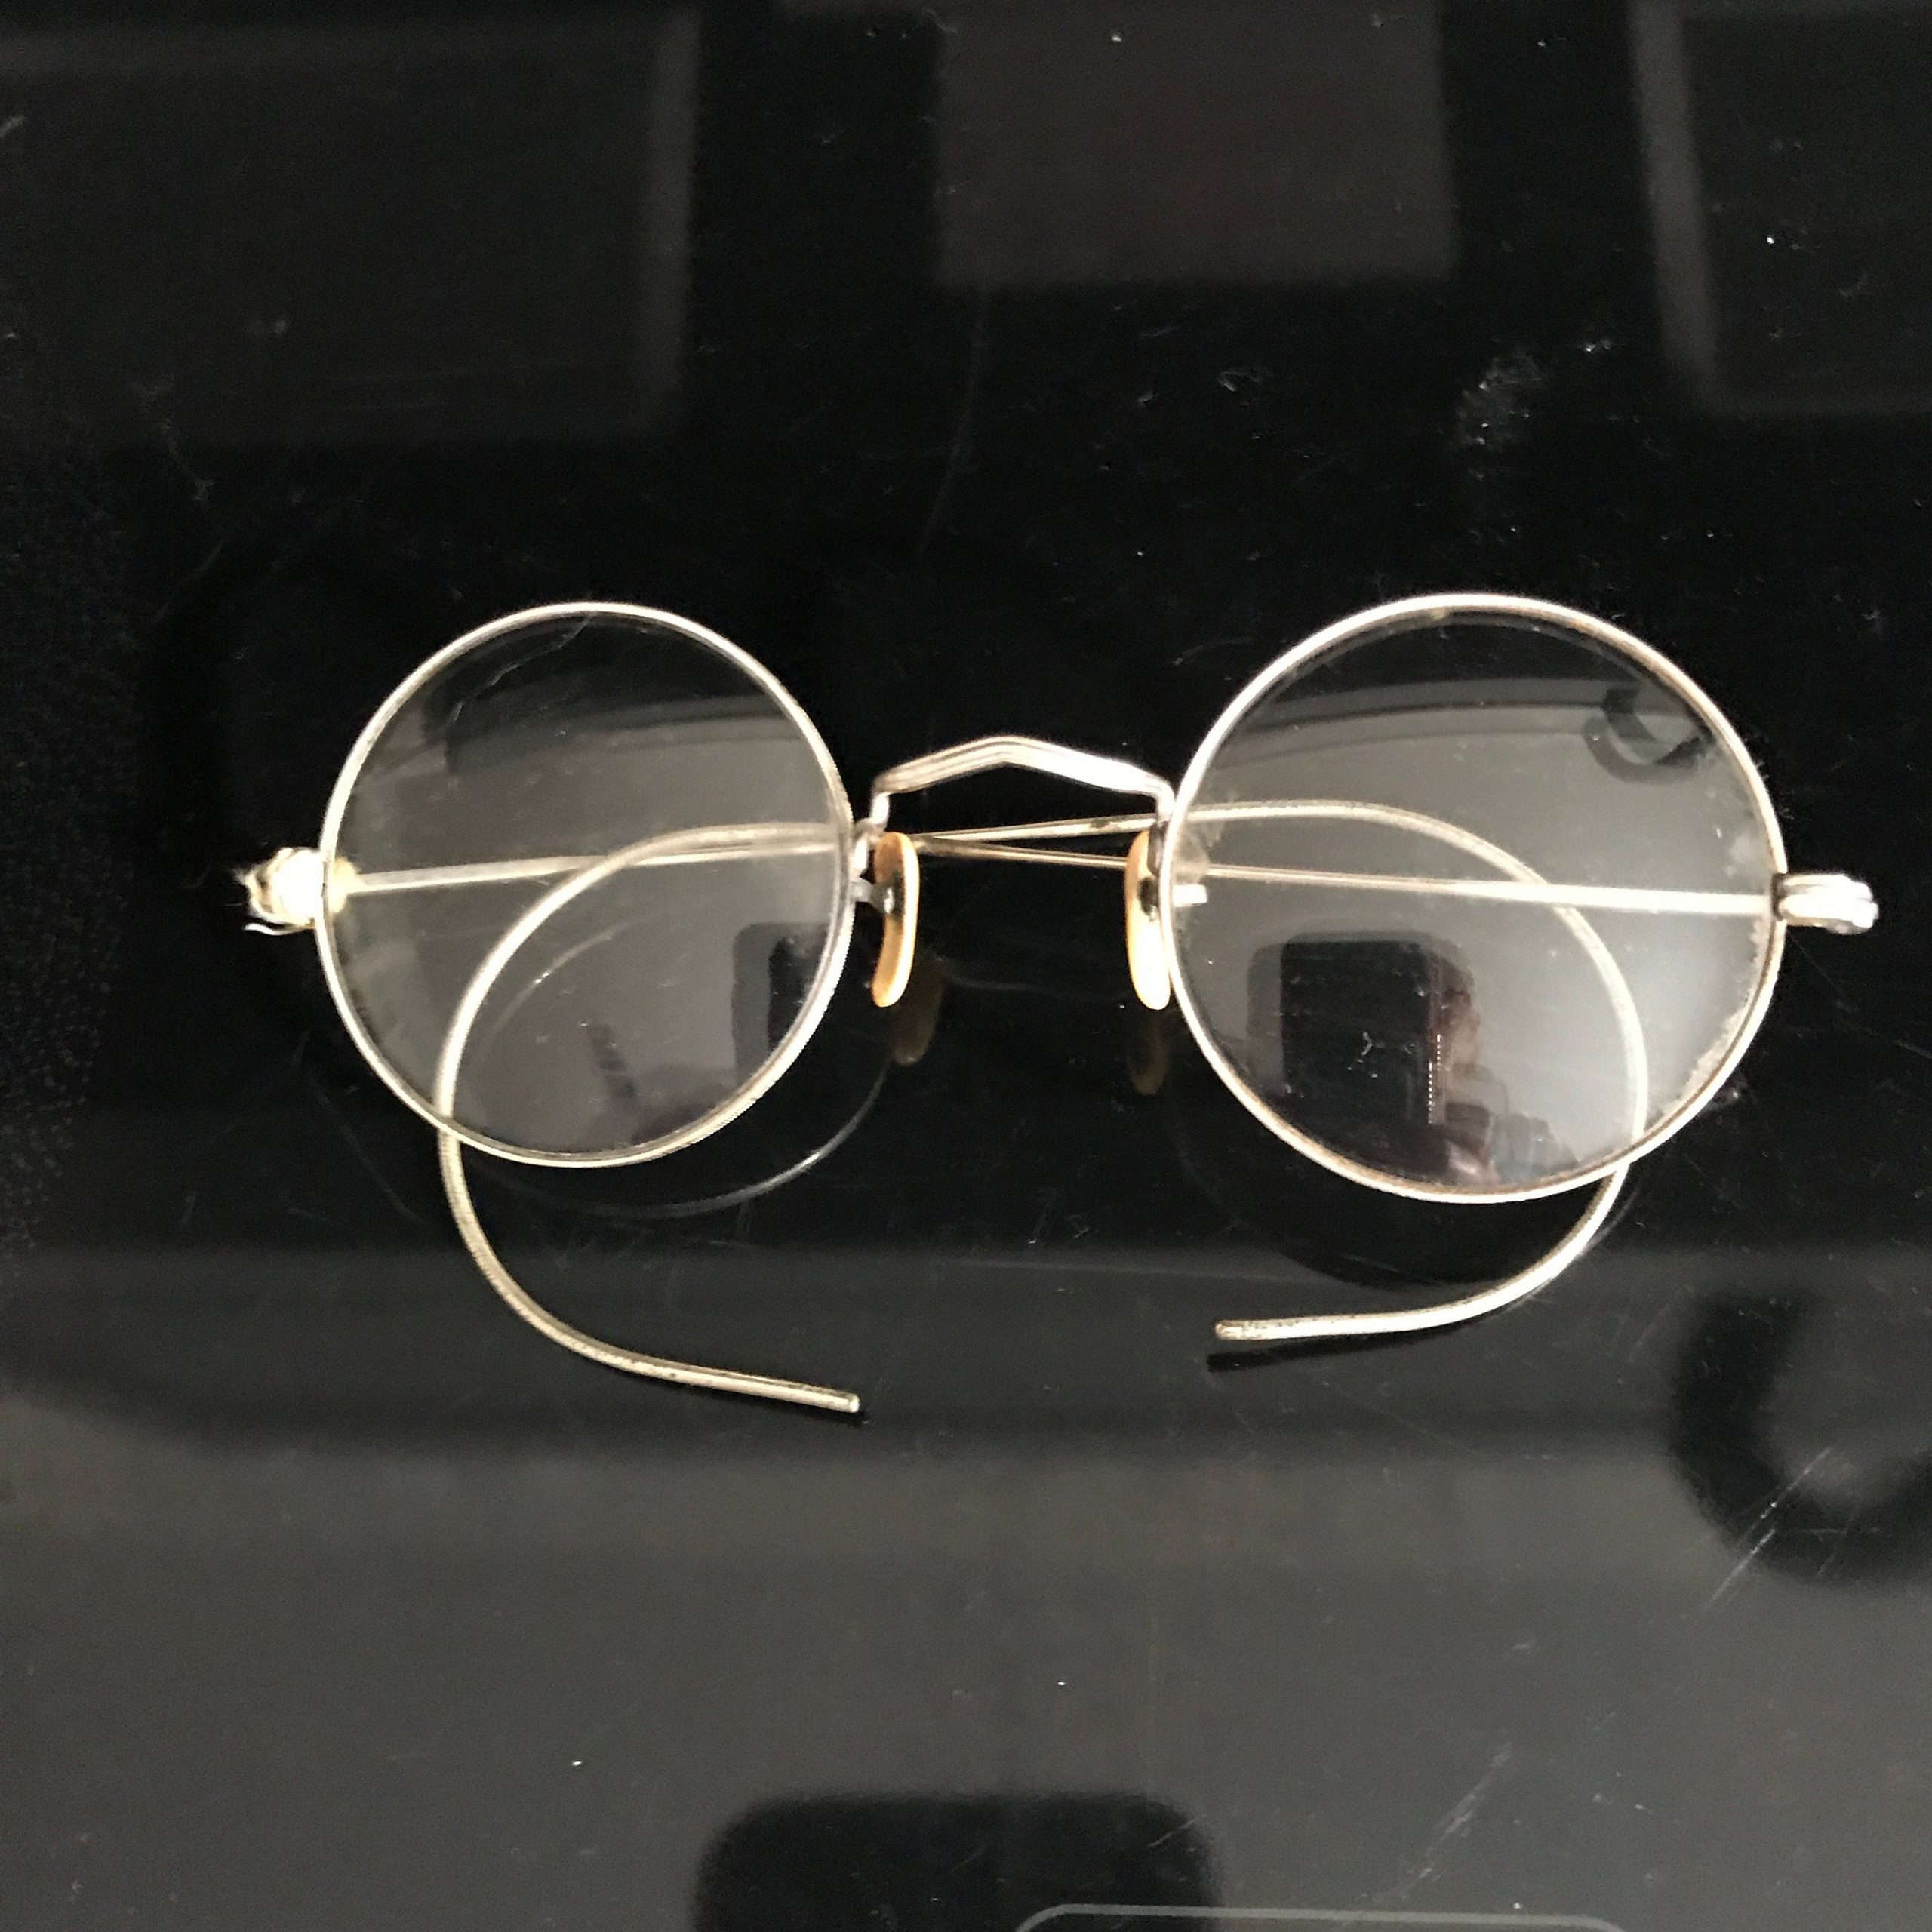 Antique Eyeglasses Silver Wire Rim Collectible Display Farmhouse Office Eye Glasses Round Fully 